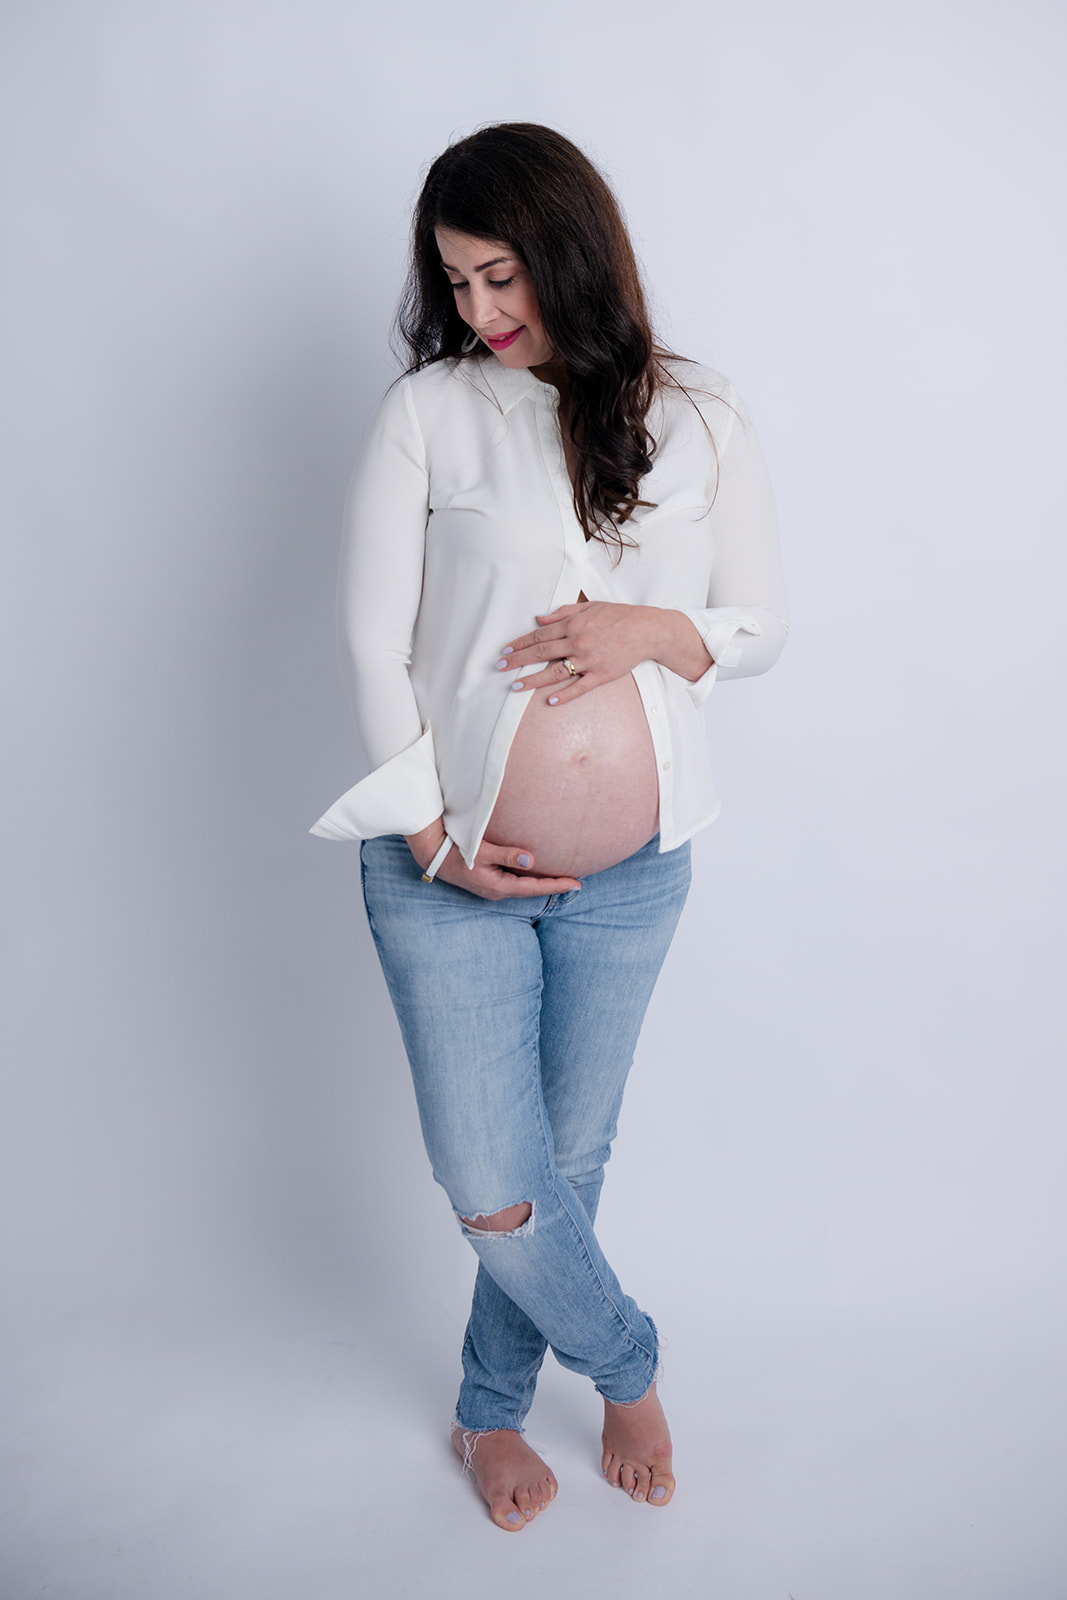 Trending studio maternity session with jeans and t-shirt